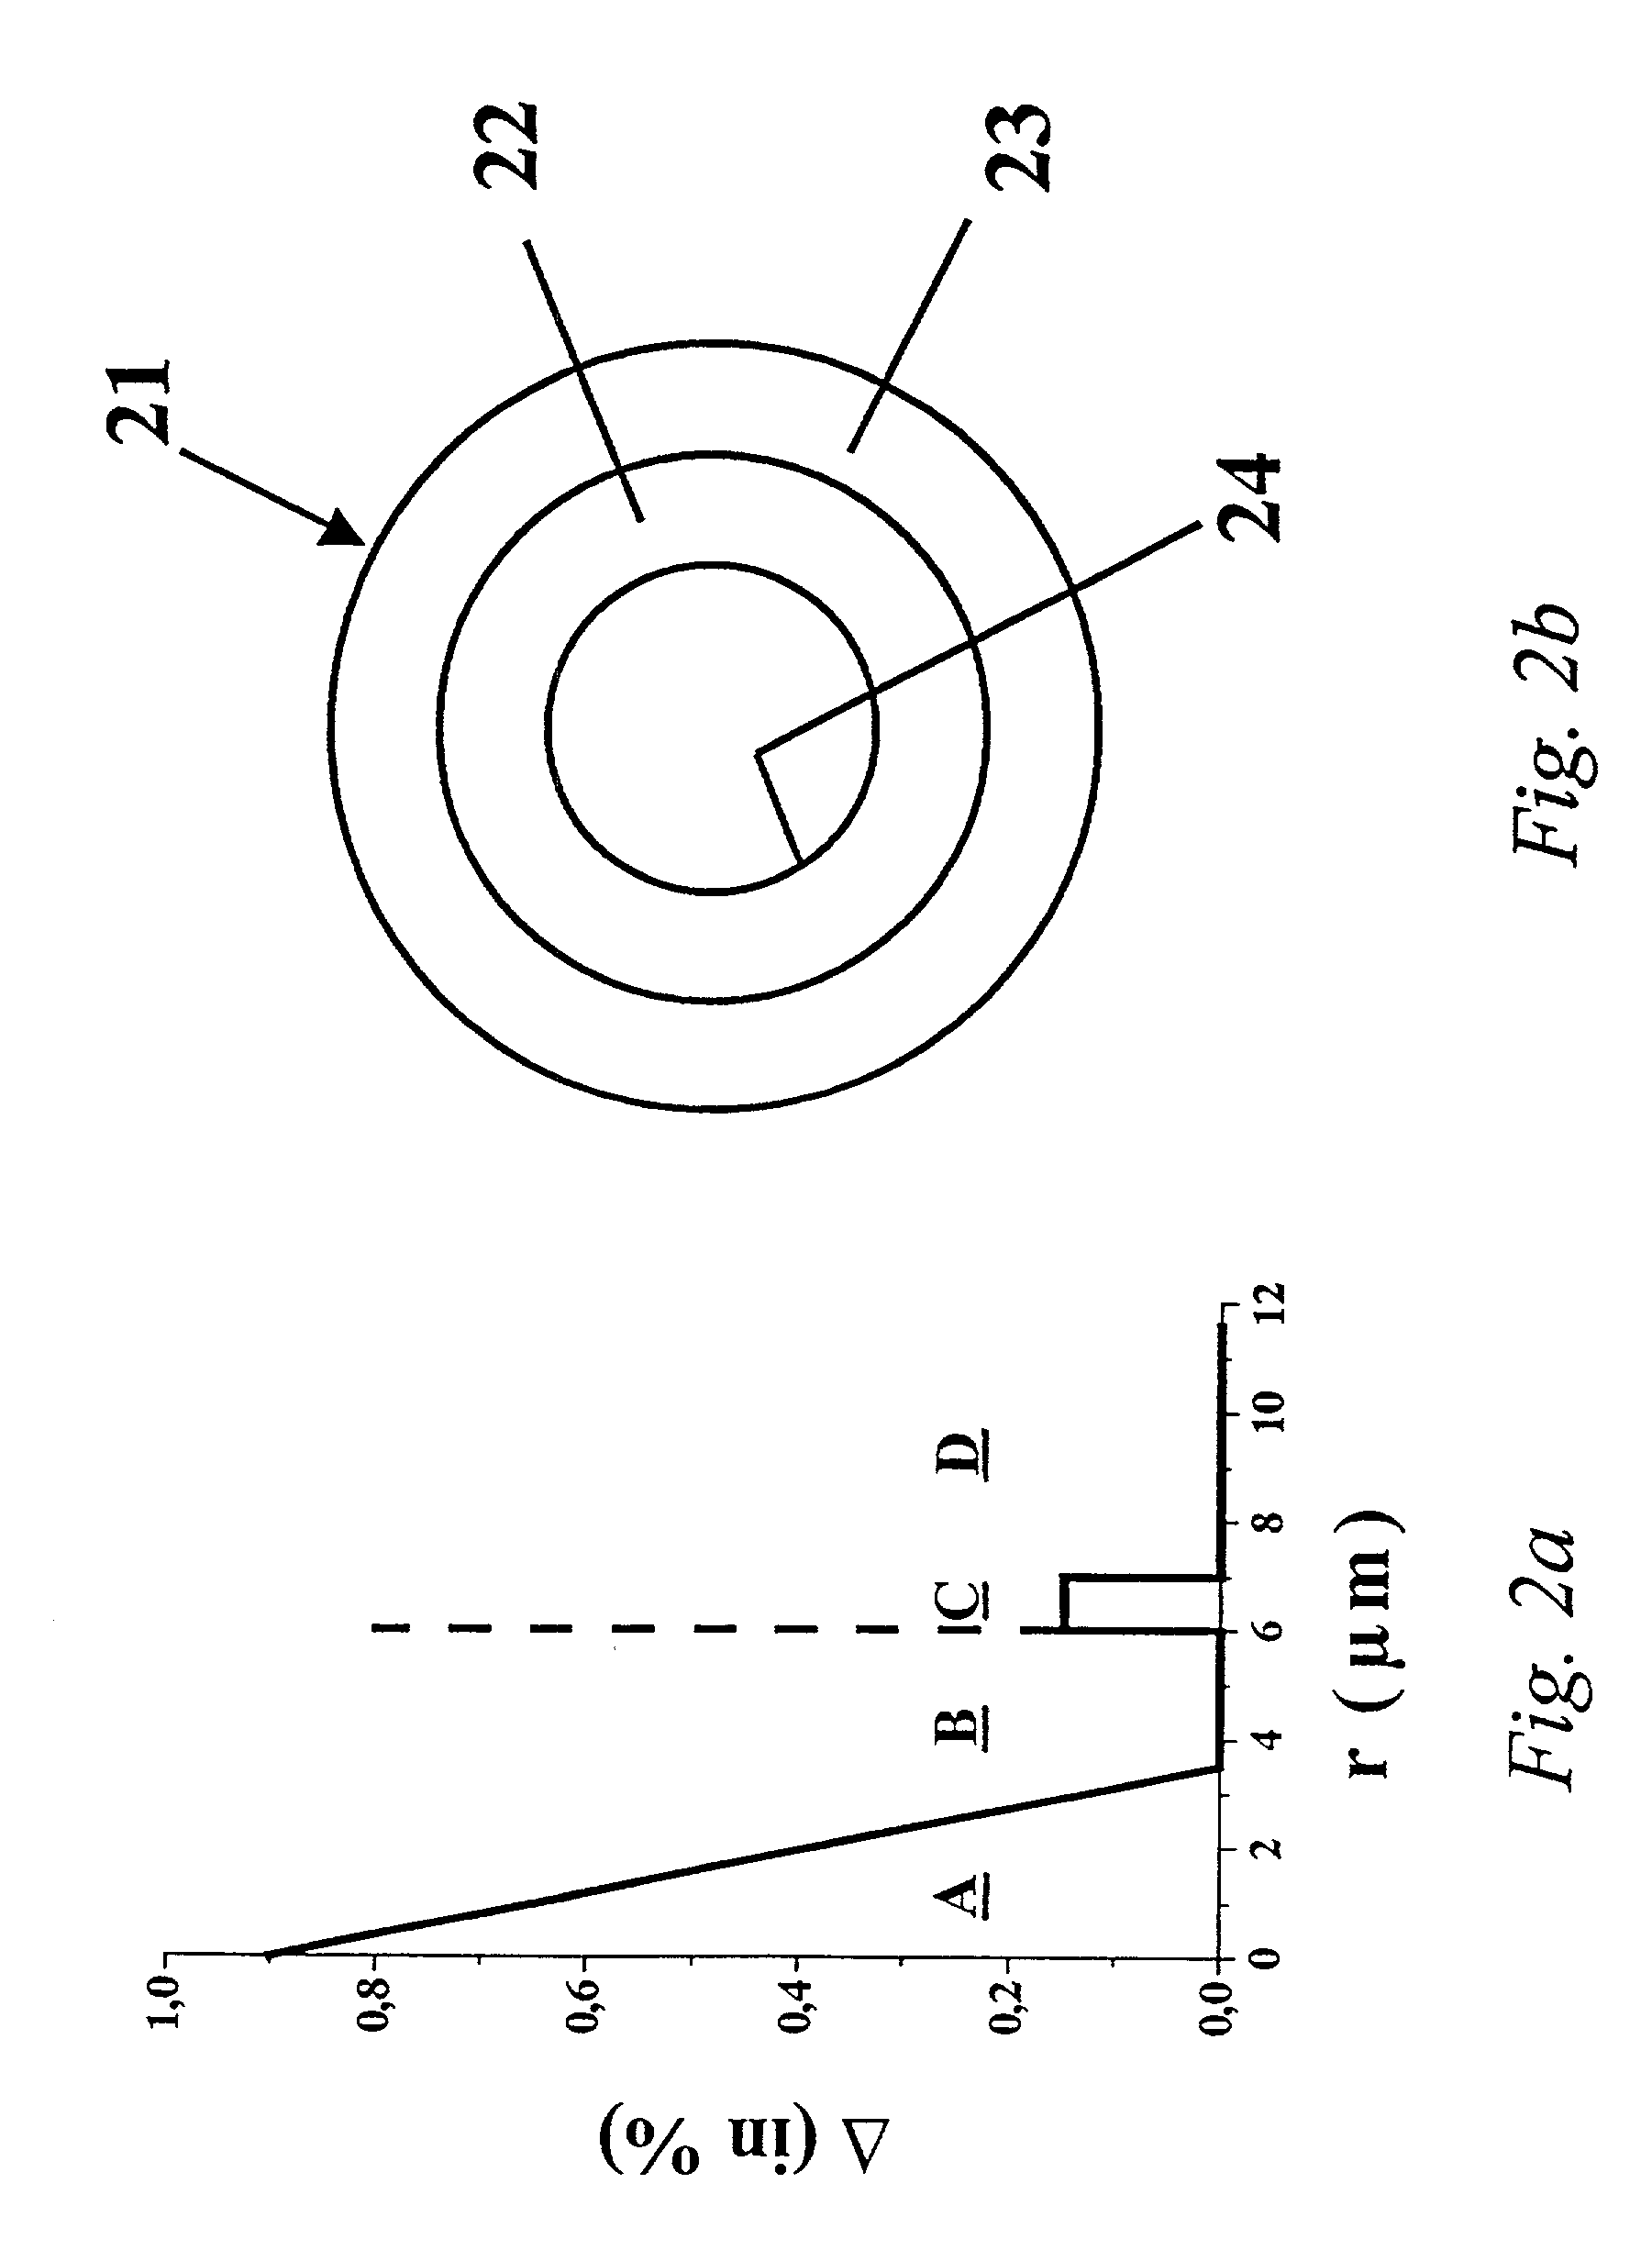 Method of making a jacketed preform for optical fibers using OVD